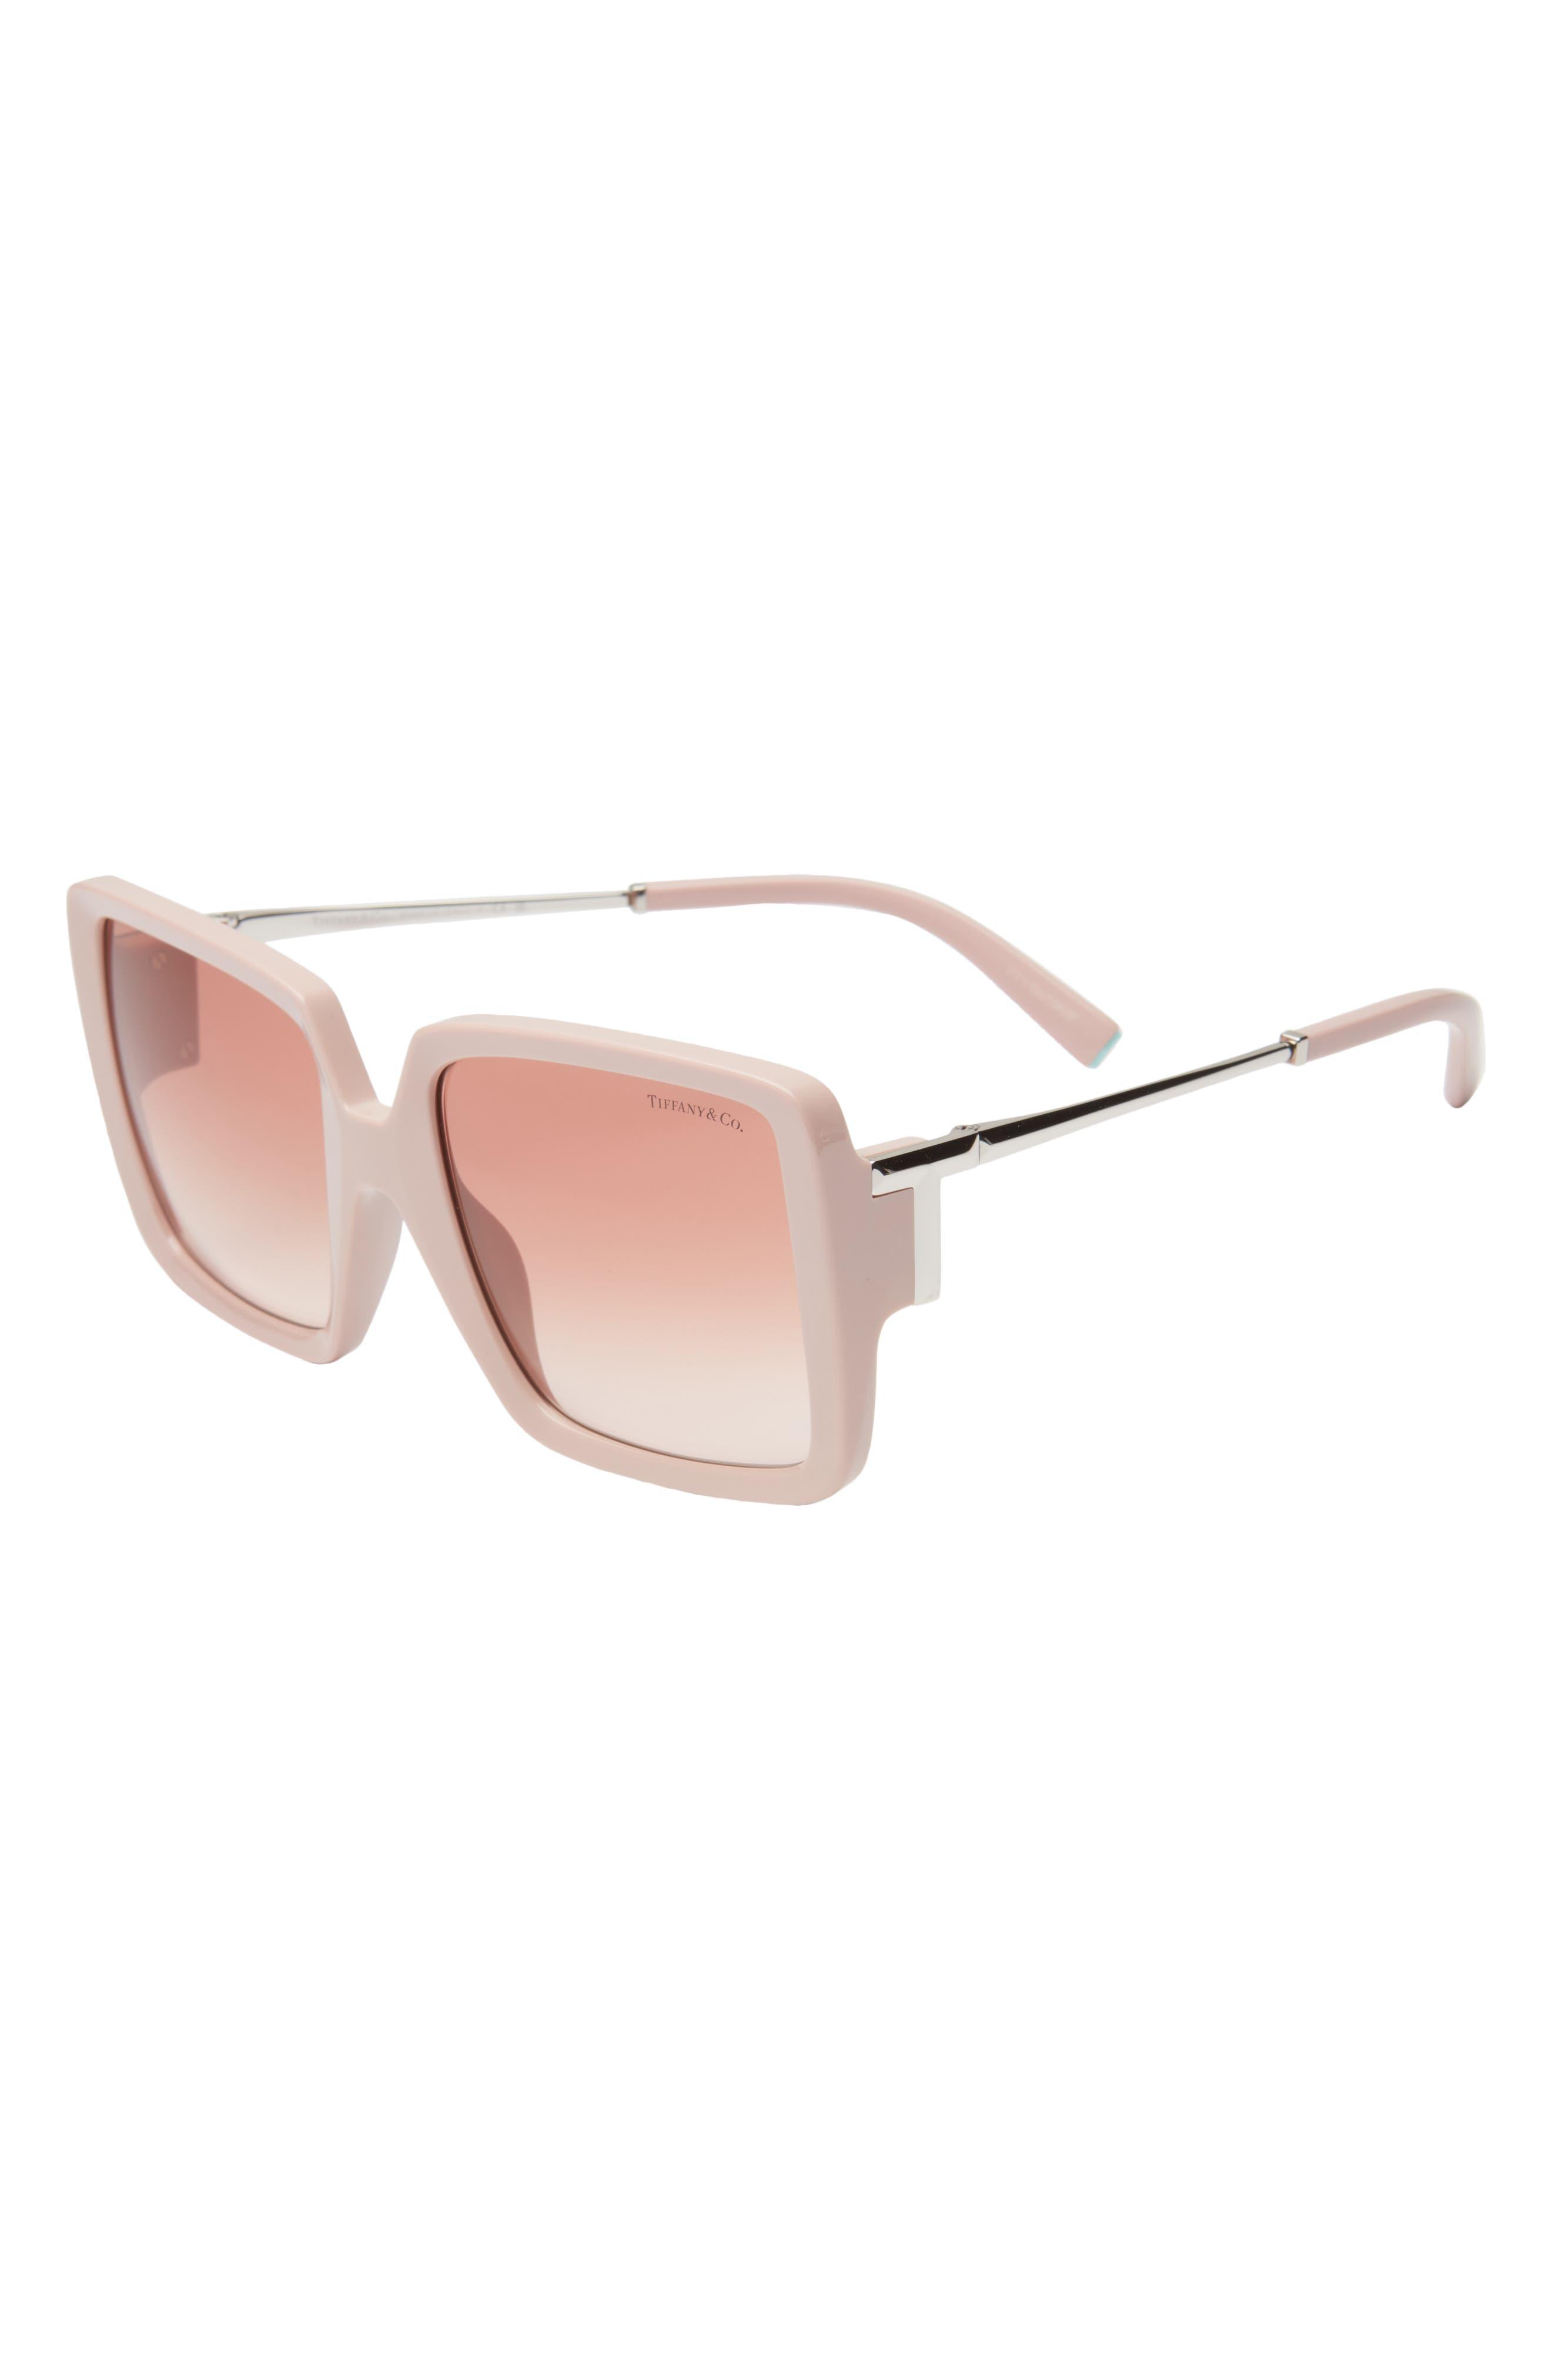 Tiffany & Co. 55mm Gradient Square Sunglasses in Pink